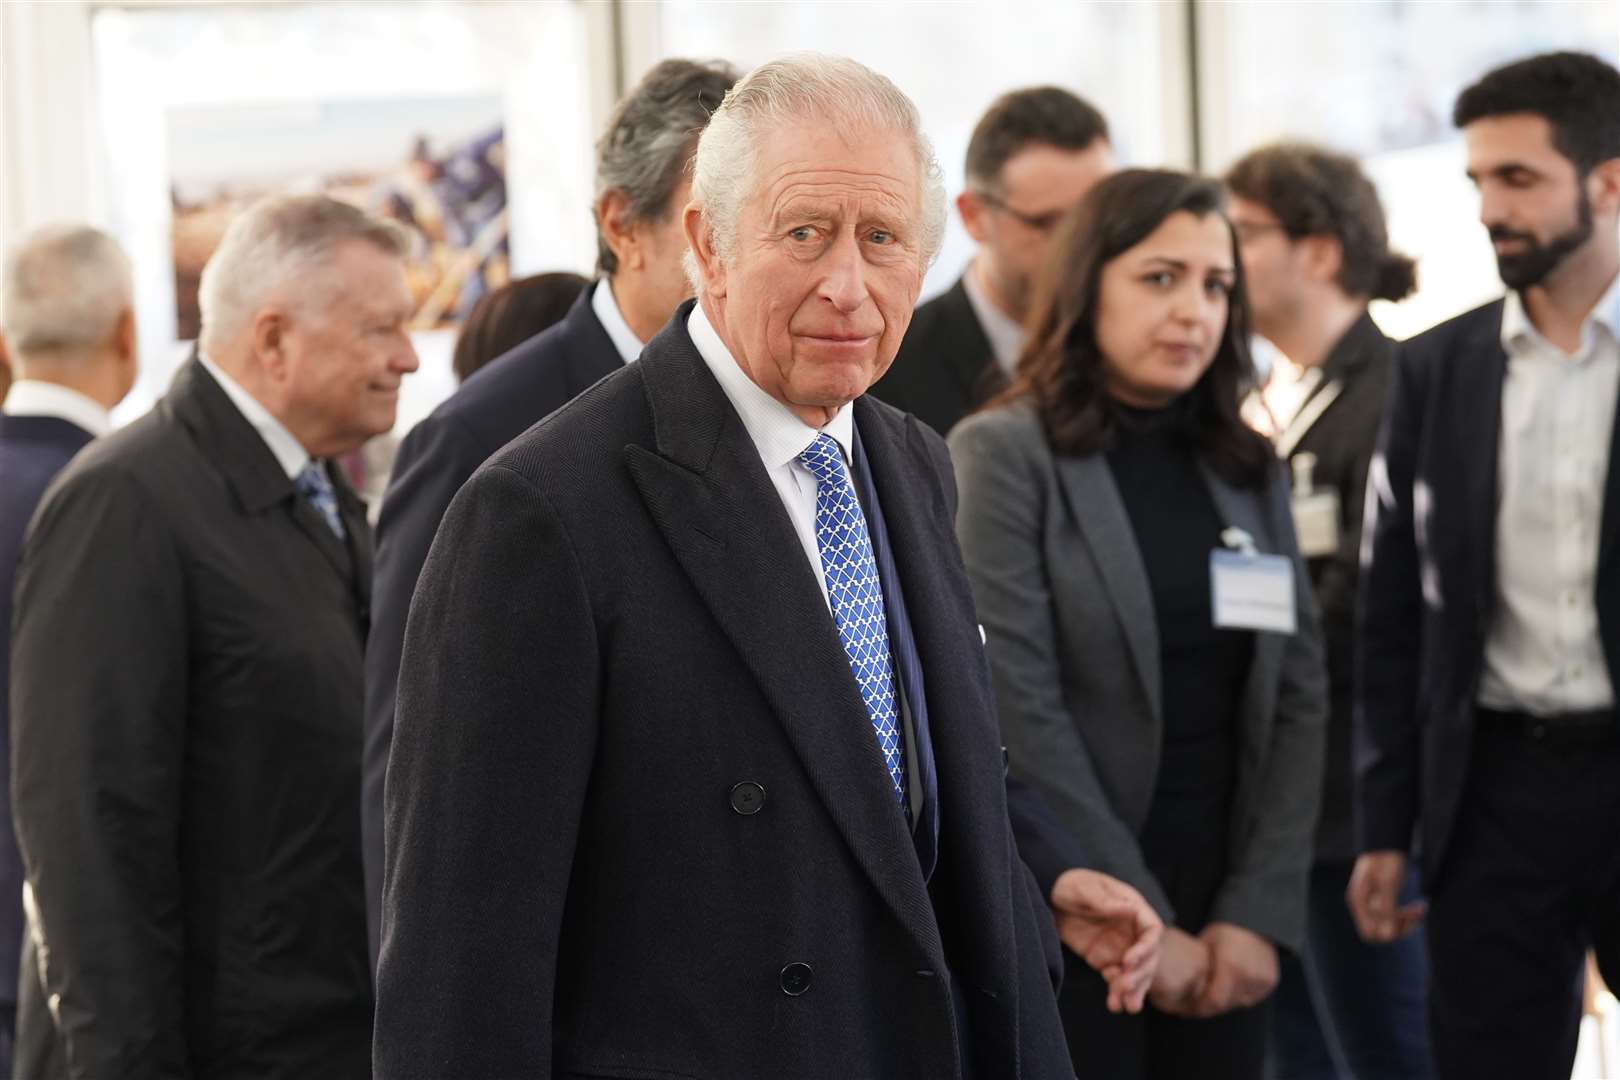 The King talks to members of the Syrian diaspora community after officially launching Syria’s House, a temporary Syrian community tent in Trafalgar Square, central London (Stefan Rousseau/PA)